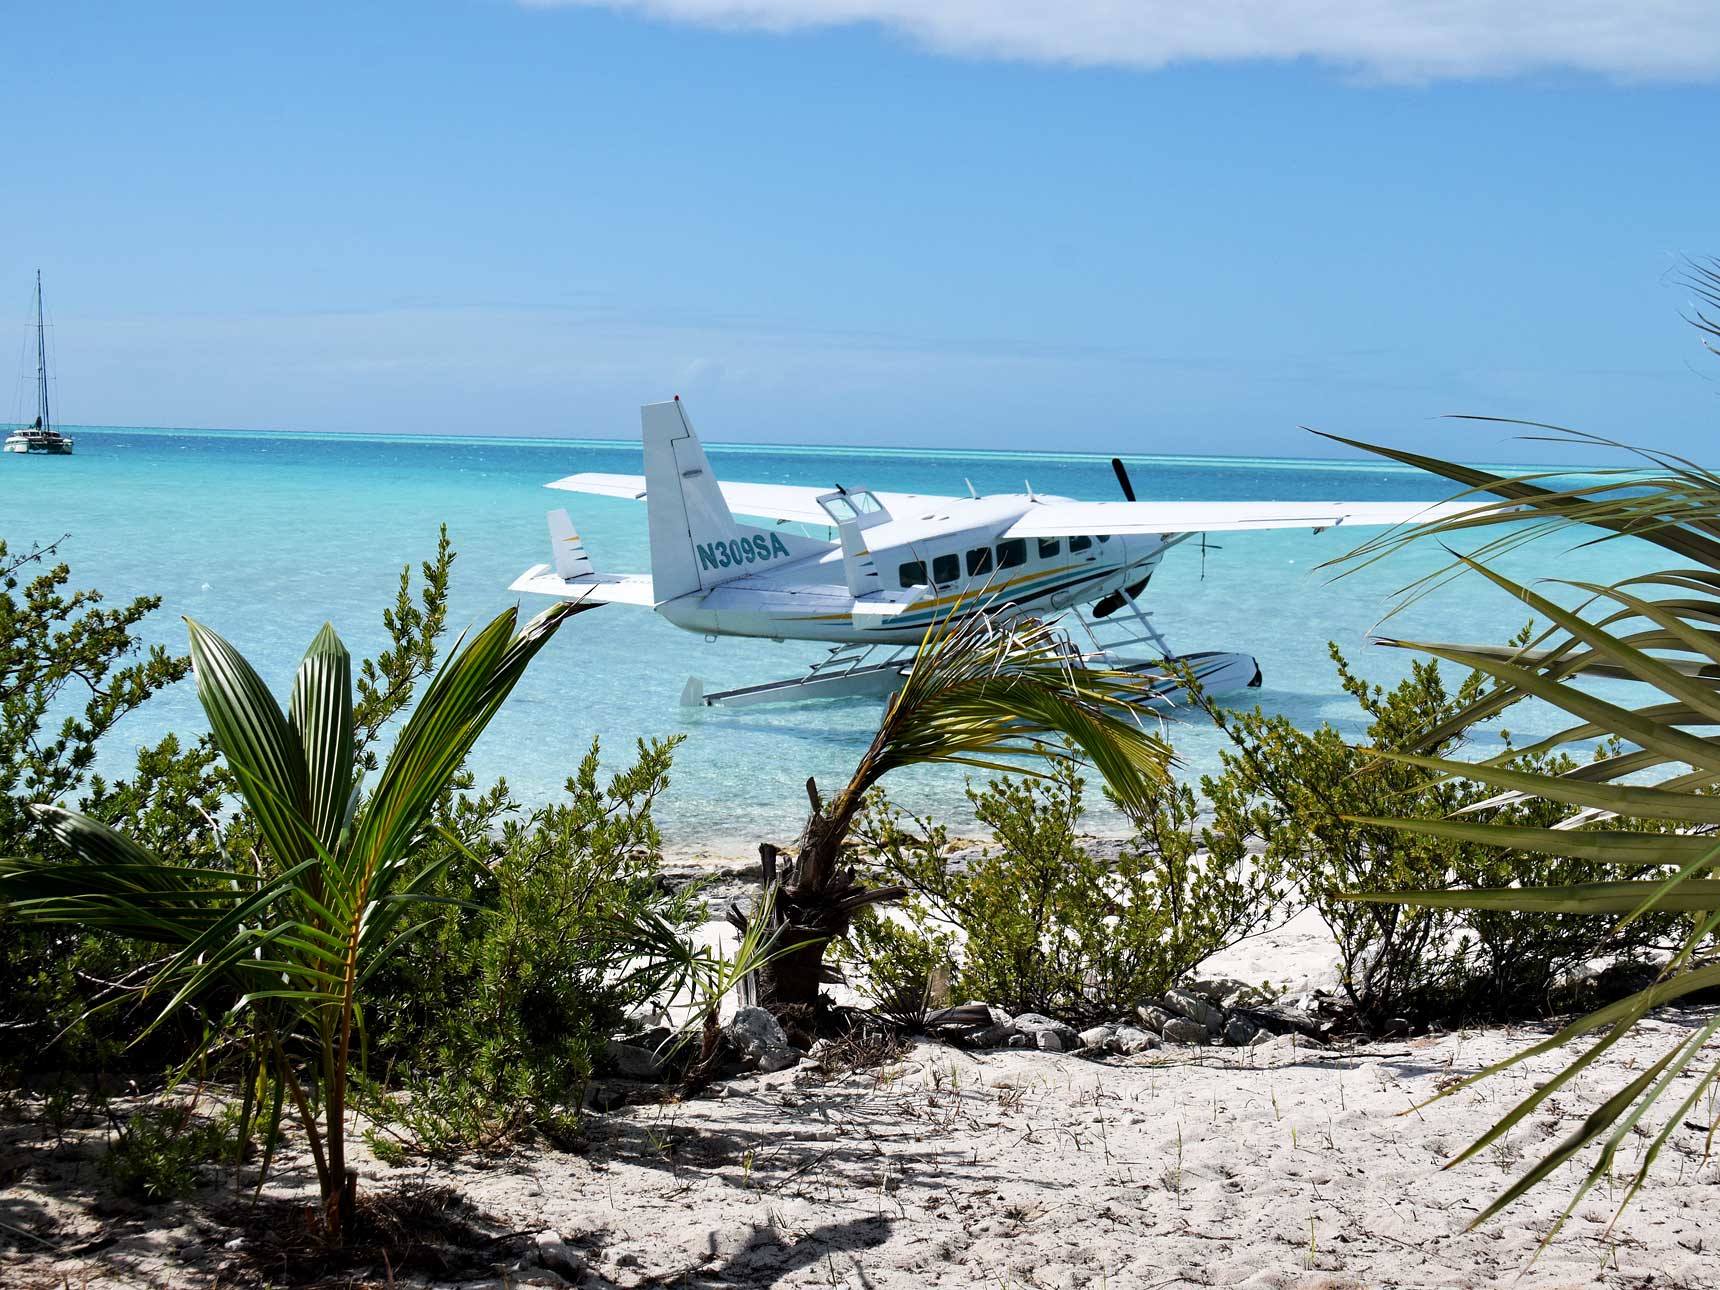 Shoreline Aviation Seaplane Charter Services to The Caribbean, The Bahamas, and New York/the Northeast